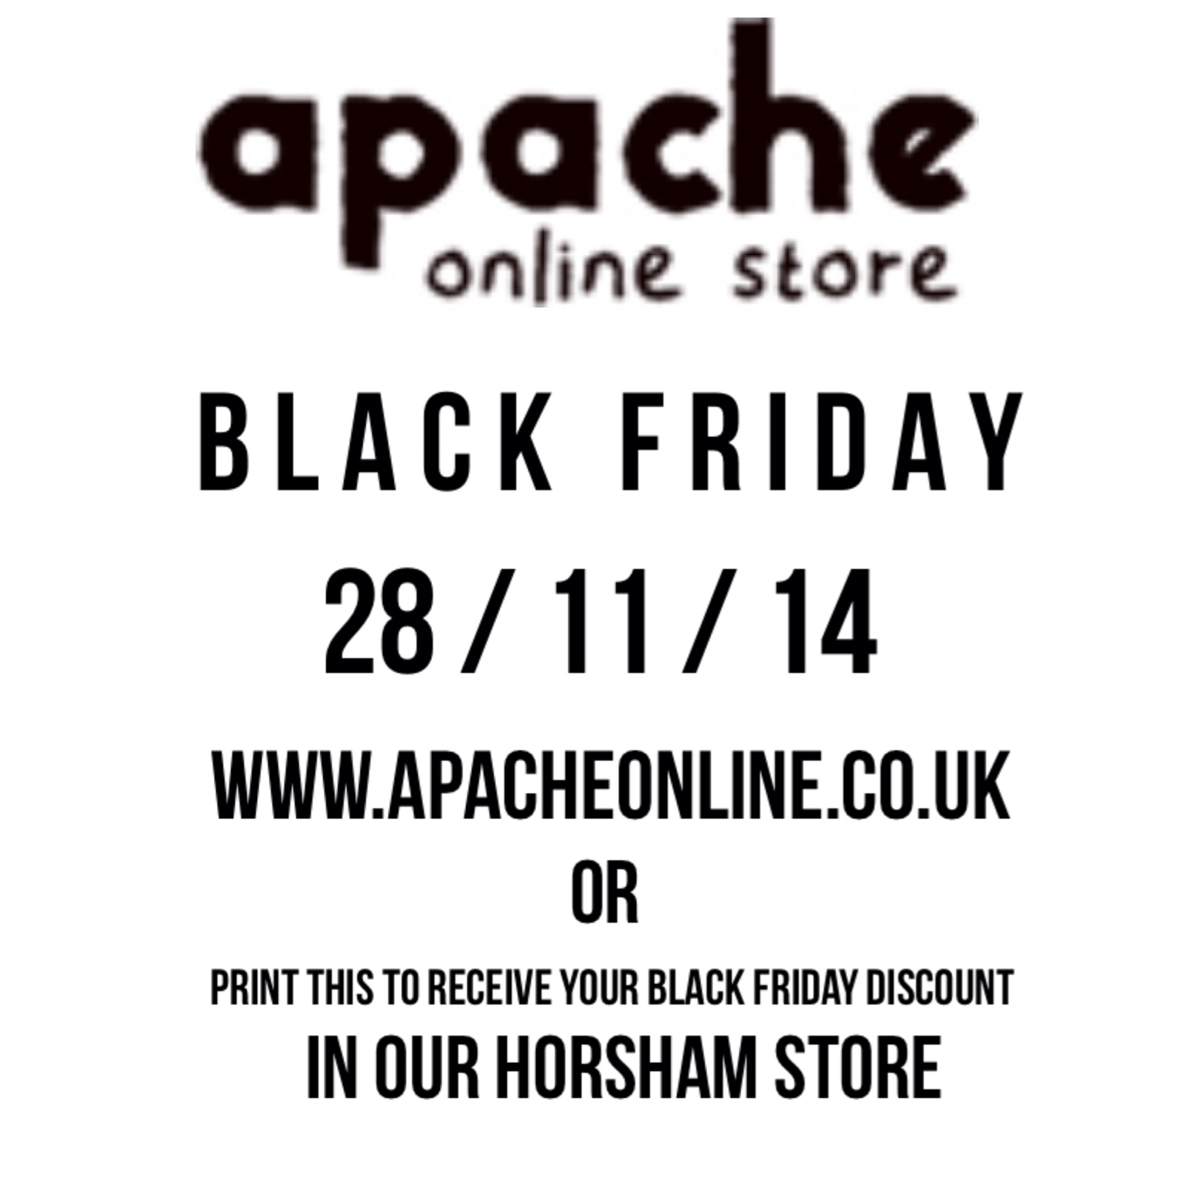 Exclusive 15% Black Friday Discount Code at Apacheonline